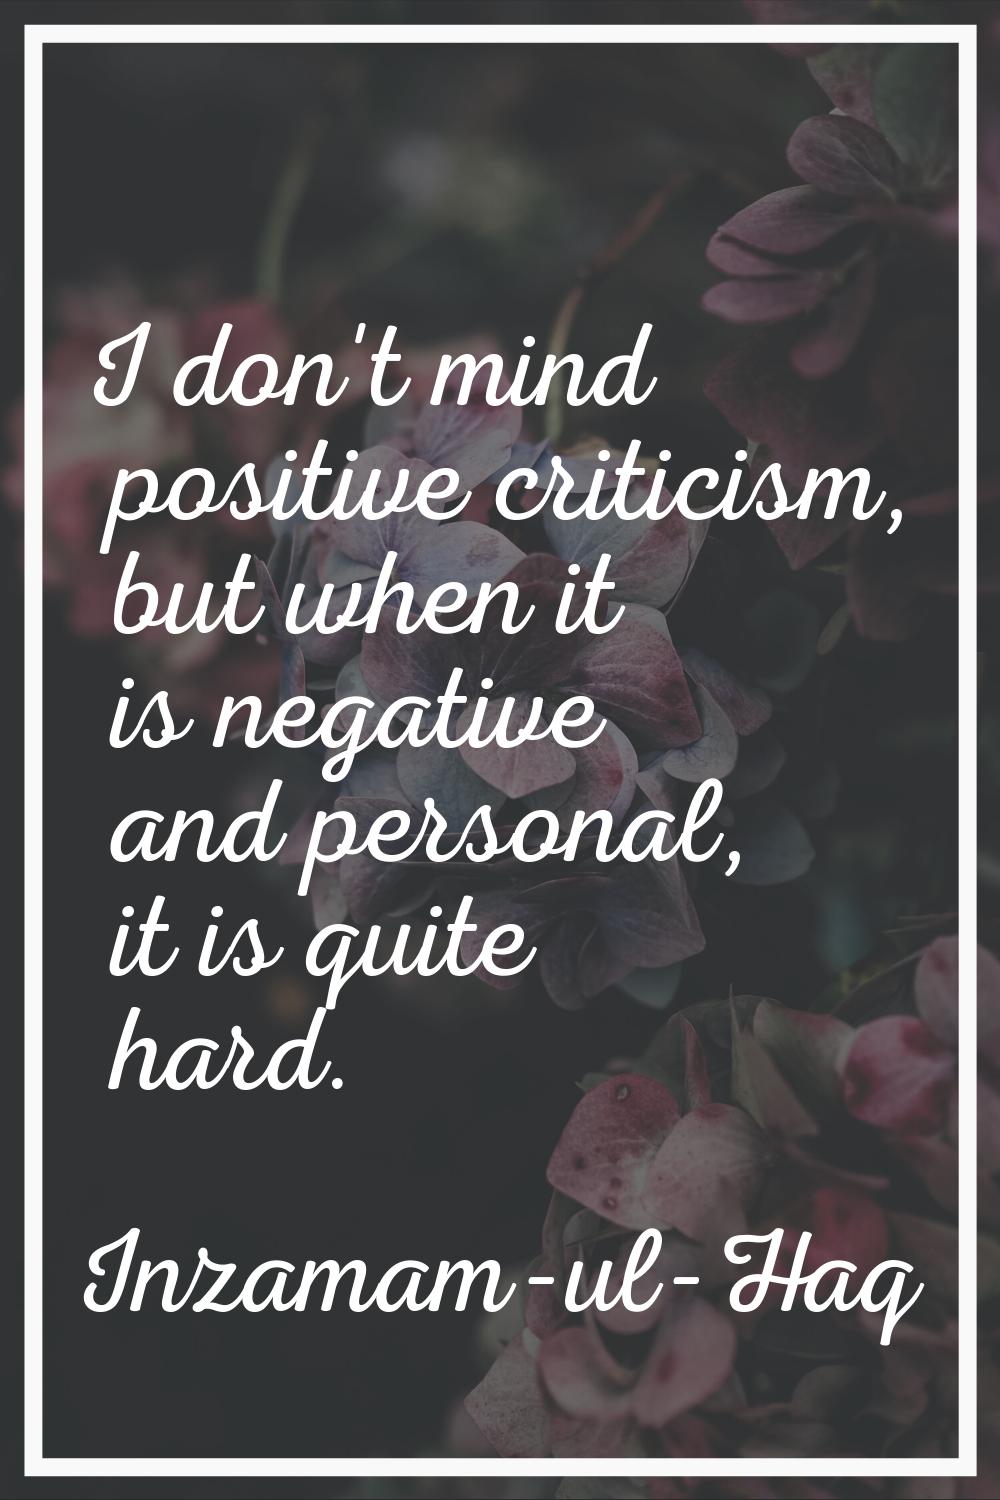 I don't mind positive criticism, but when it is negative and personal, it is quite hard.